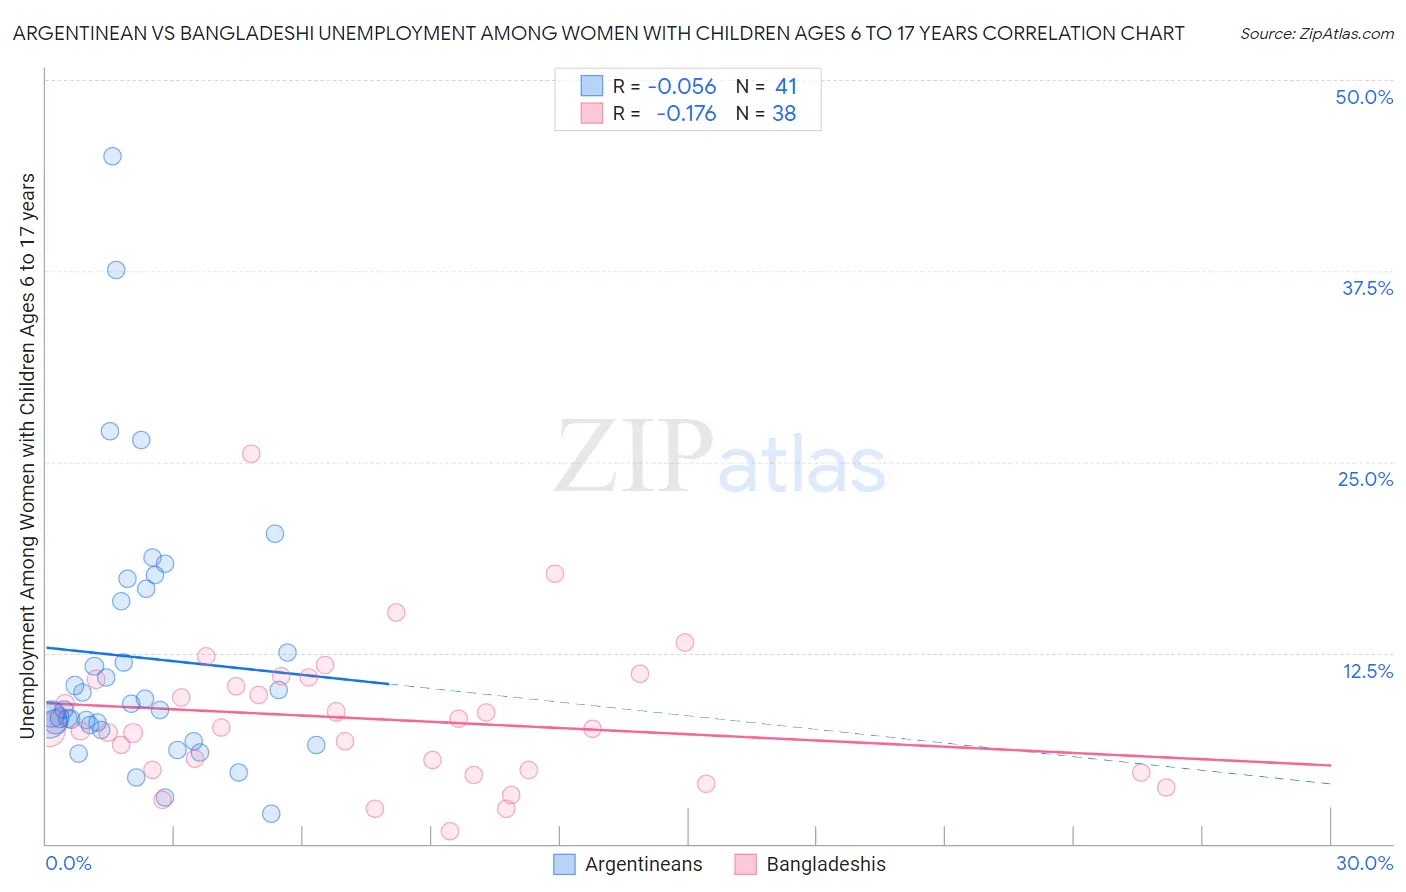 Argentinean vs Bangladeshi Unemployment Among Women with Children Ages 6 to 17 years